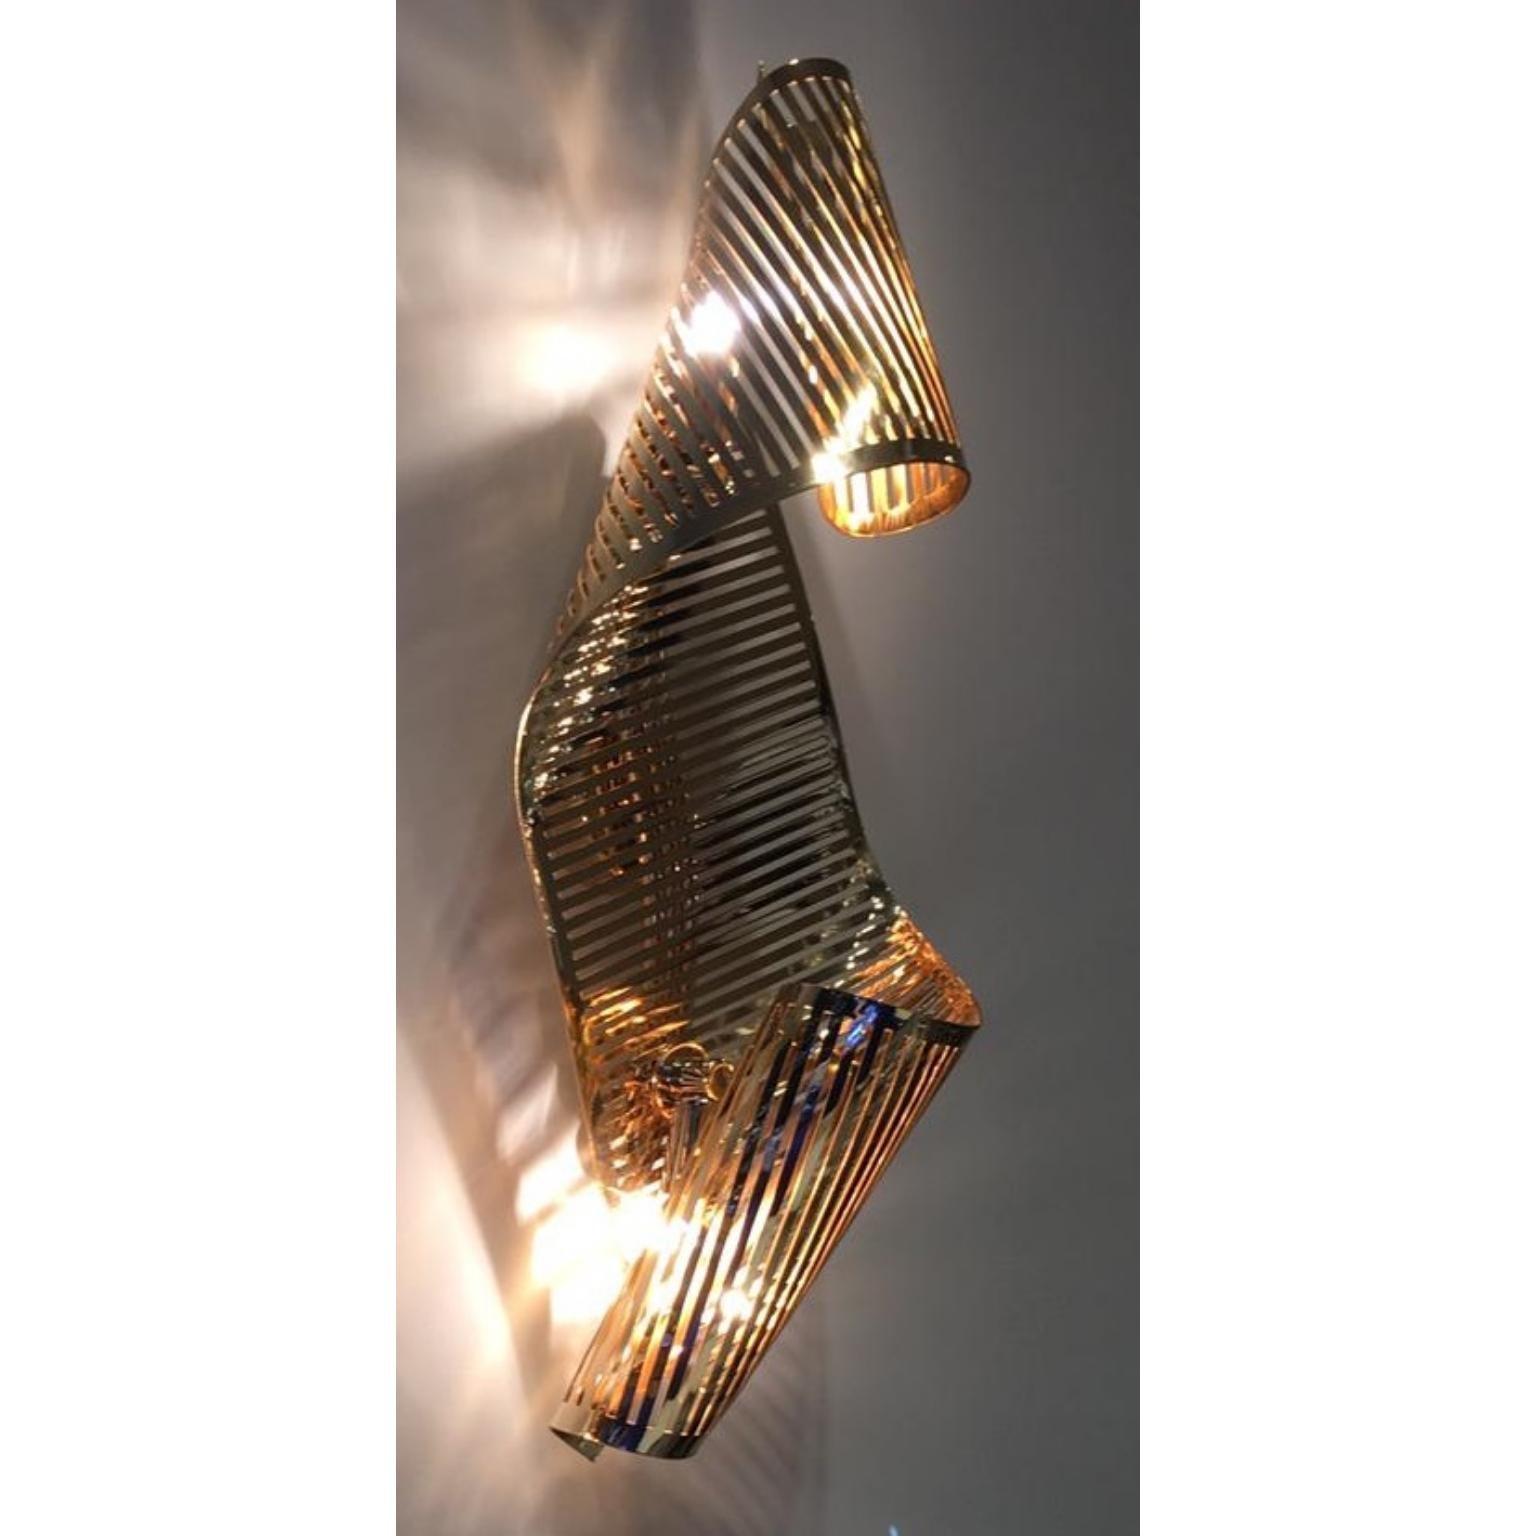 Spiral Wall Lamp by Memoir Essence
Dimensions: D 10 x W 20 x H 60 cm.
Materials: Polished brass gold plated.

Spiral wall lamp is a dynamic piece, inspired in the capacity that spiral shapes have to make a dynamic twist in a bedroom, dining or